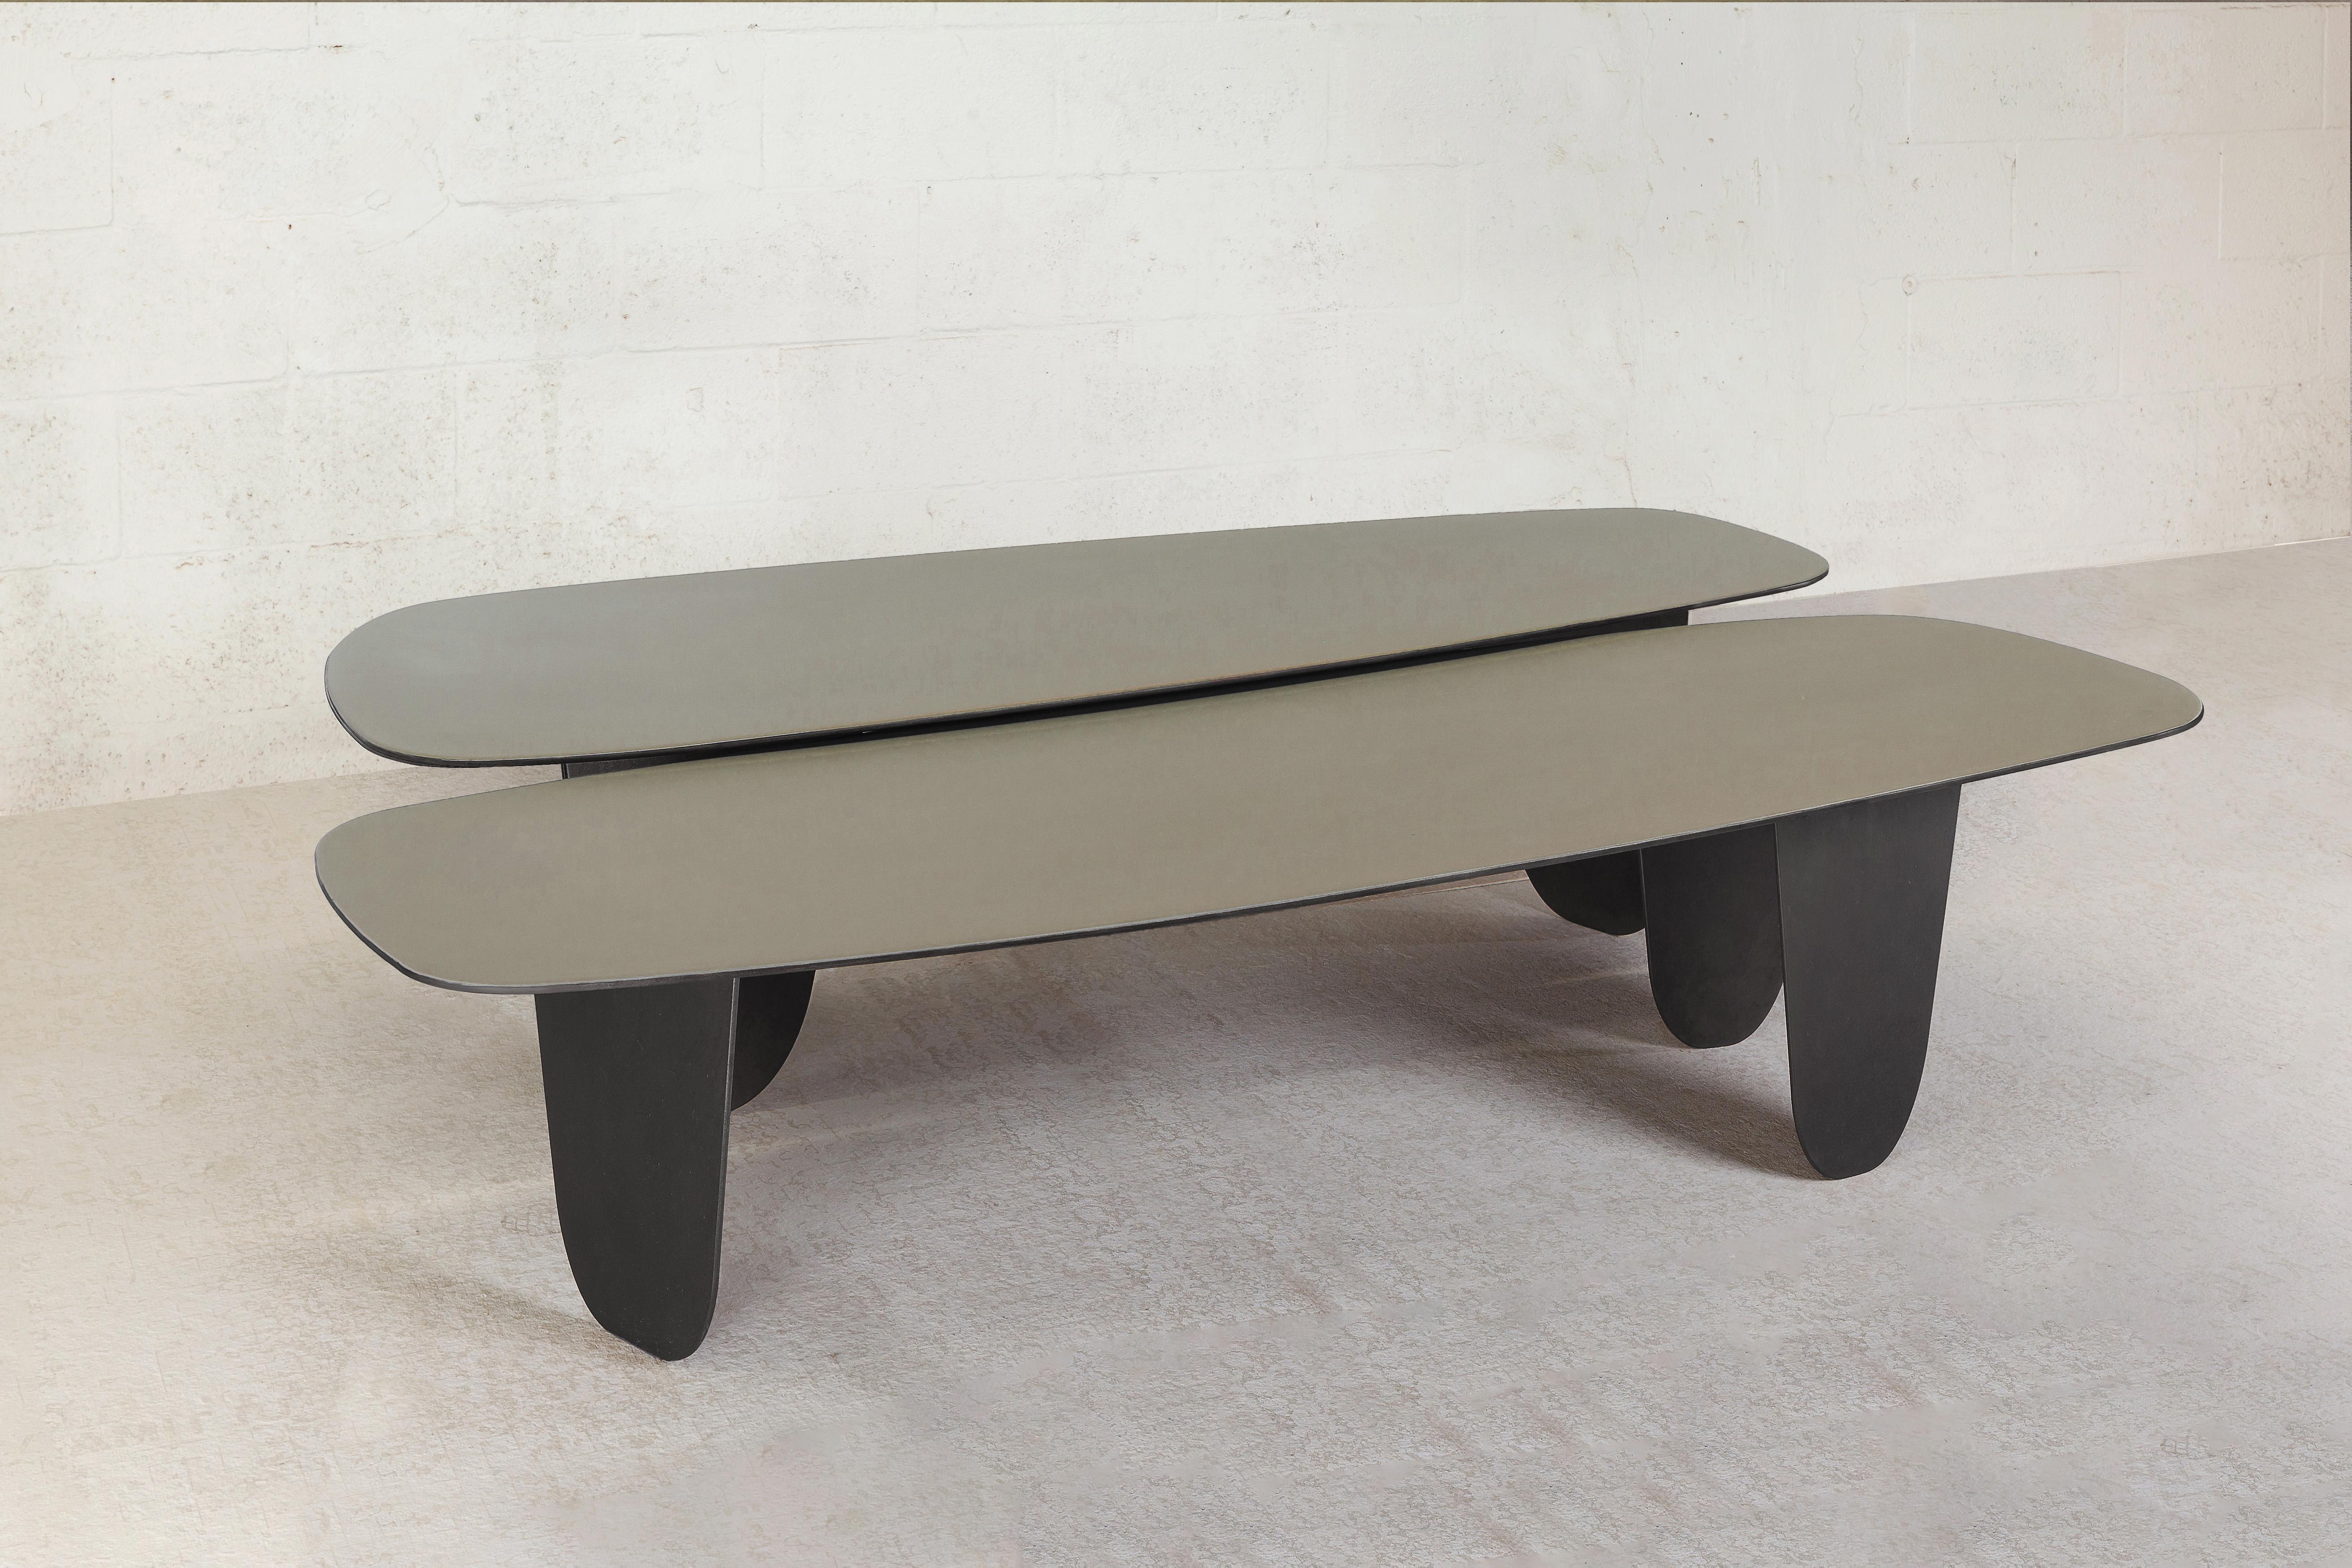 Contemporary Freeform Minimalist Steel and Resin Low Tables by Vivian Carbonell im Zustand „Neu“ im Angebot in Miami, FL